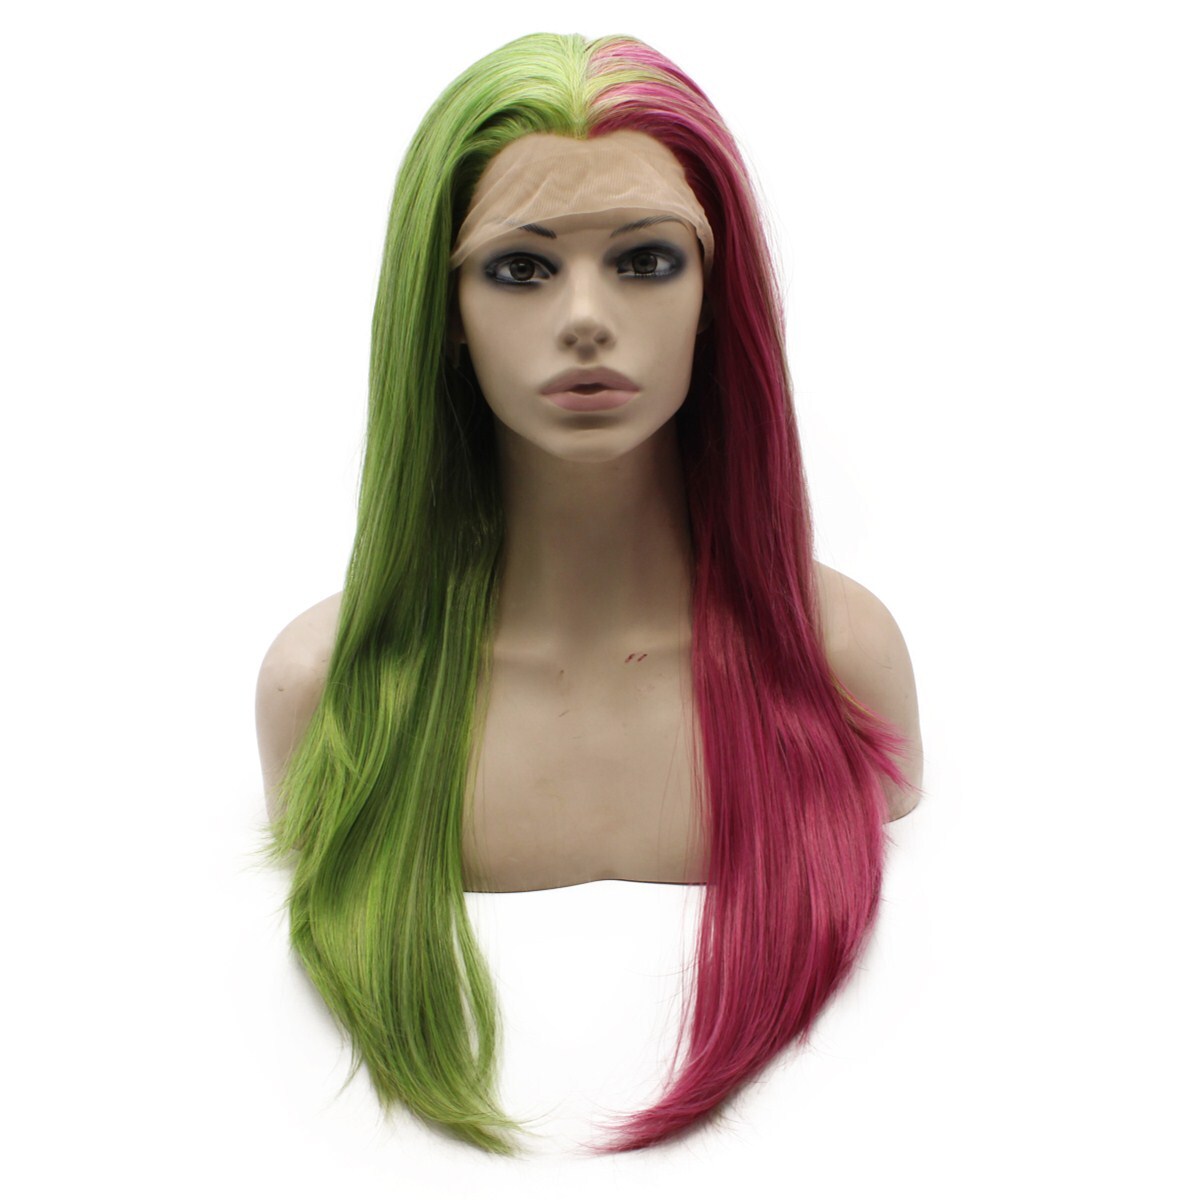 fluorescent wig,half black half white wig,drag hair,colorful lace front wig...